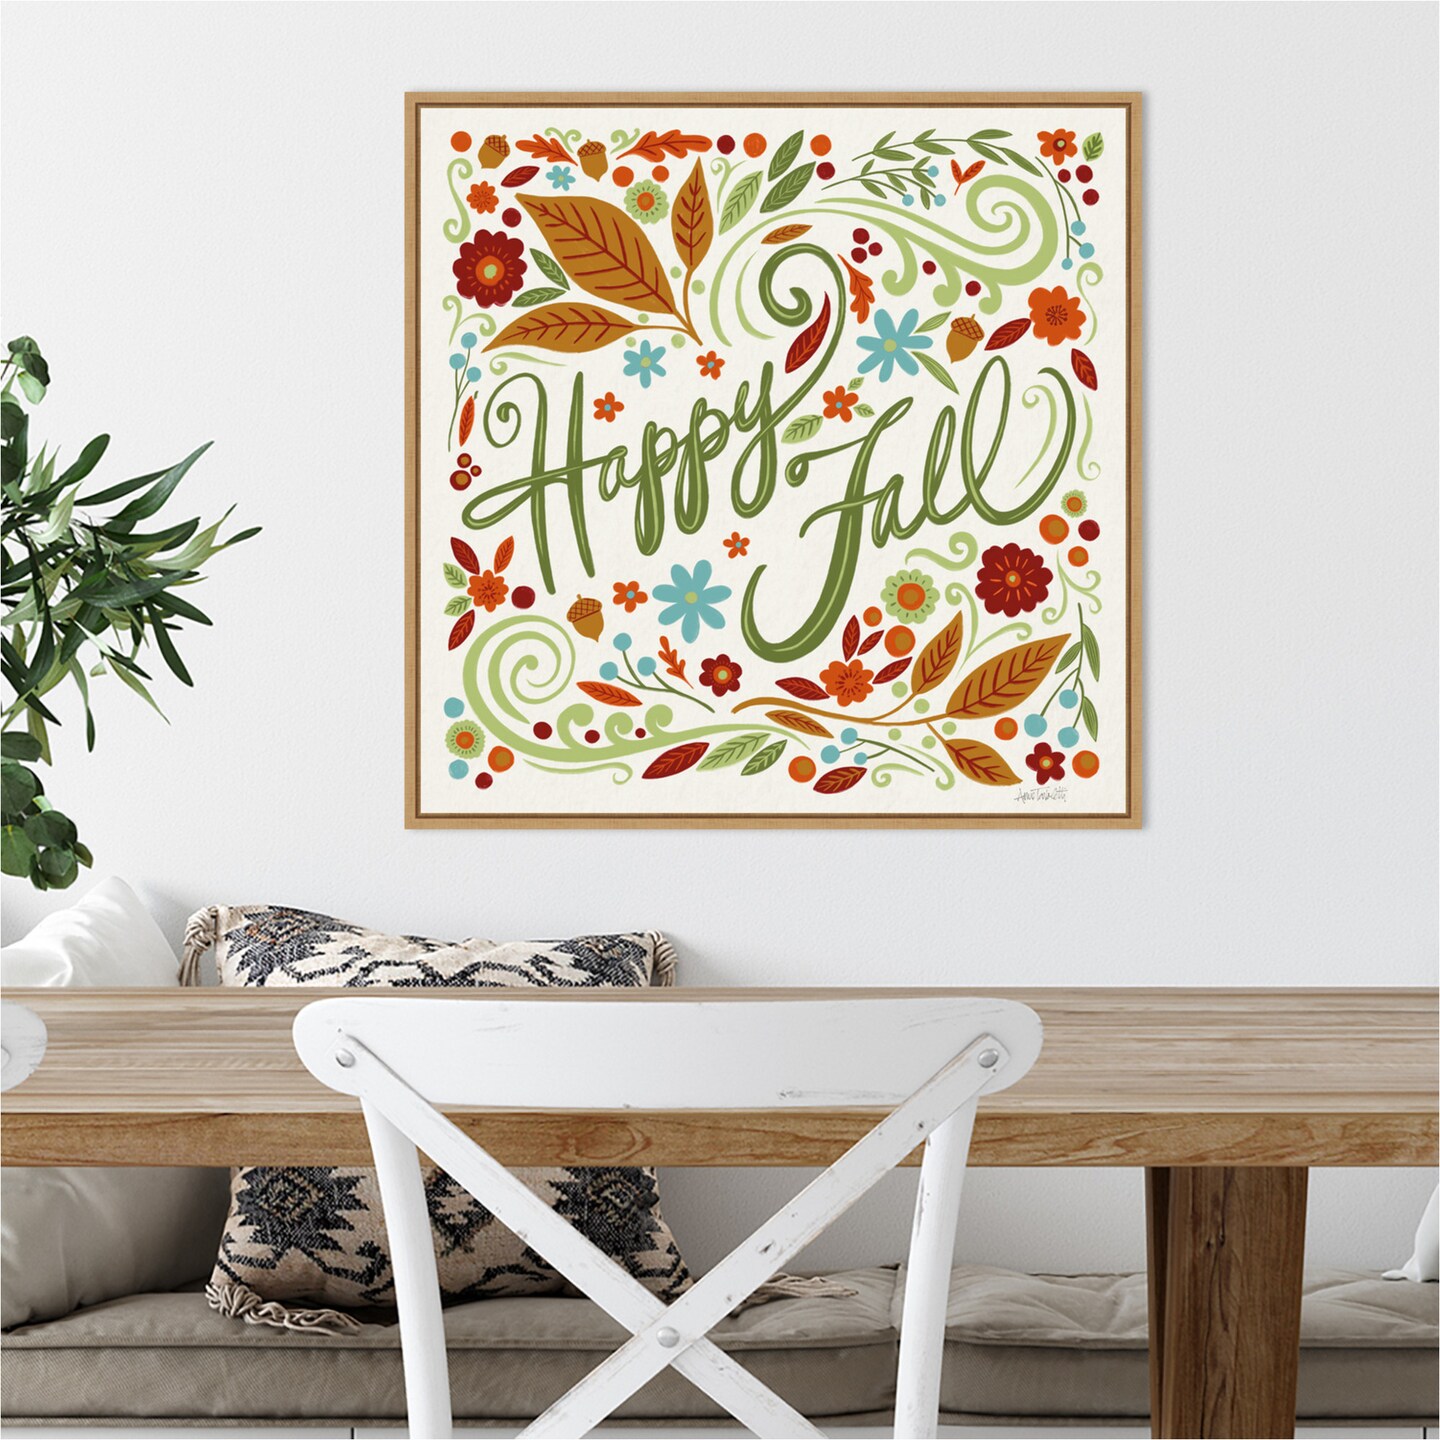 Happy Fall I by Anne Tavoletti 22-in. W x 22-in. H. Canvas Wall Art Print Framed in Natural